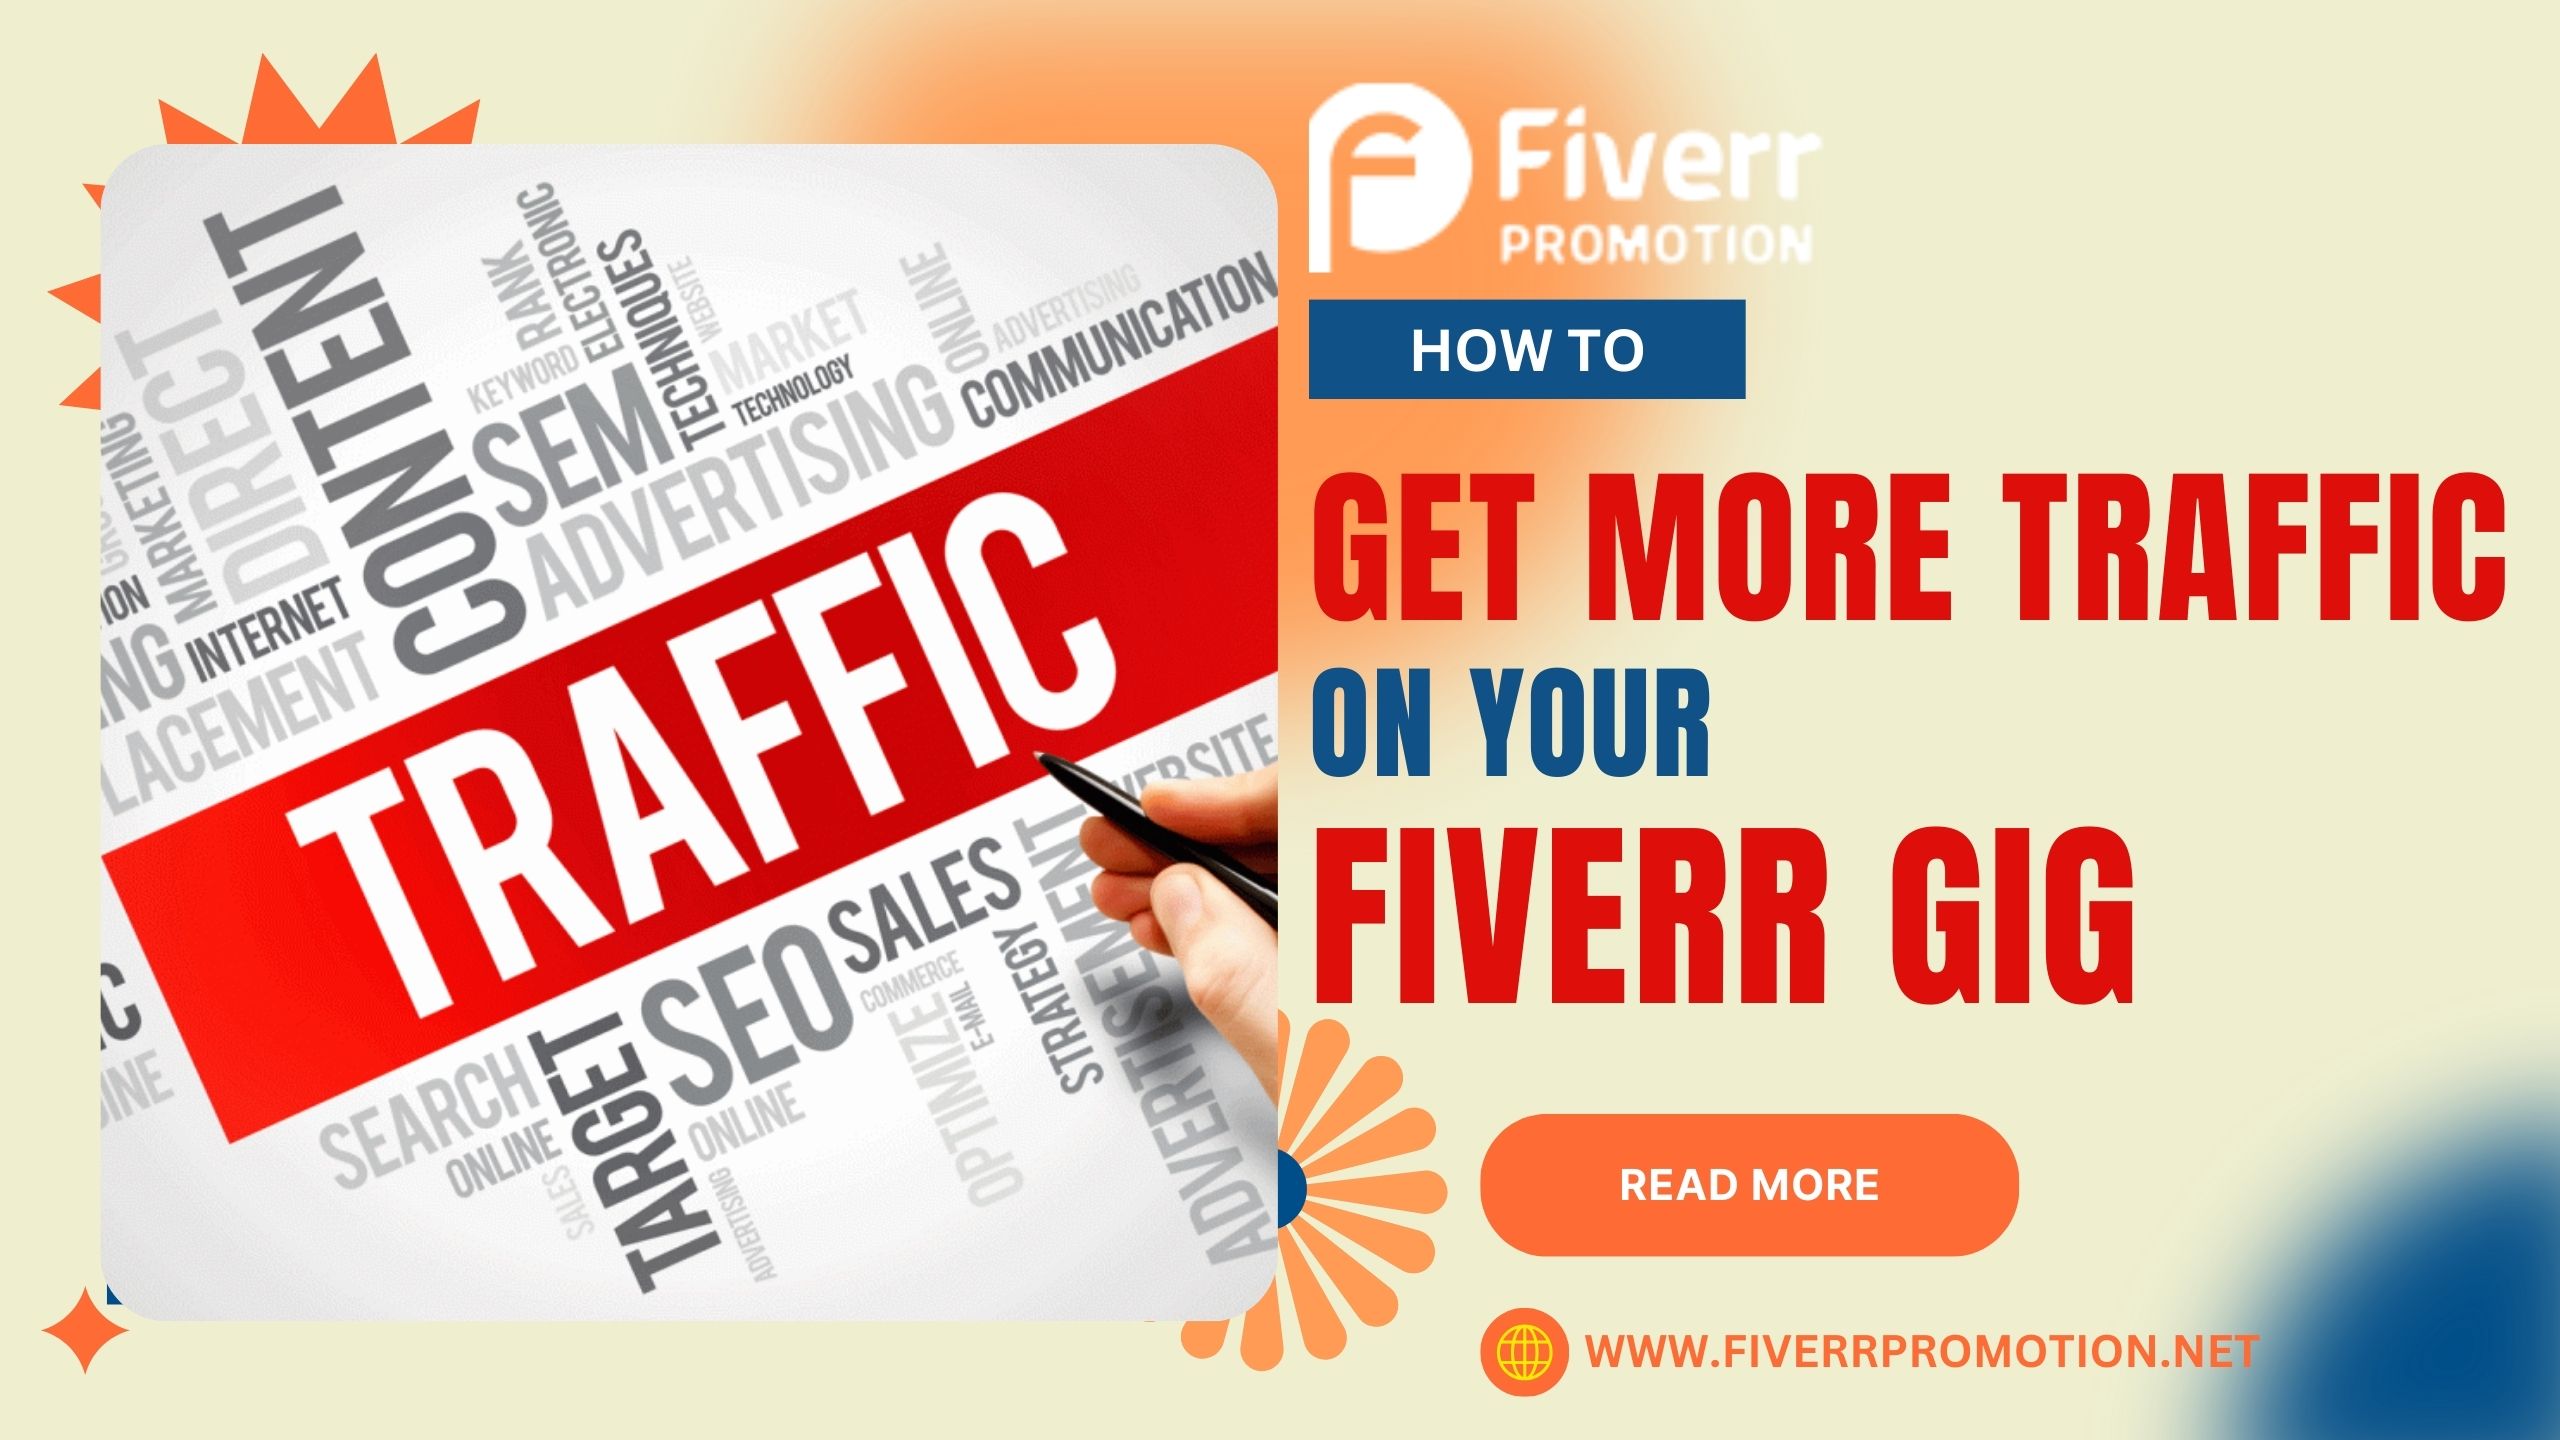 How to Get More Traffic on Your Fiverr Gig